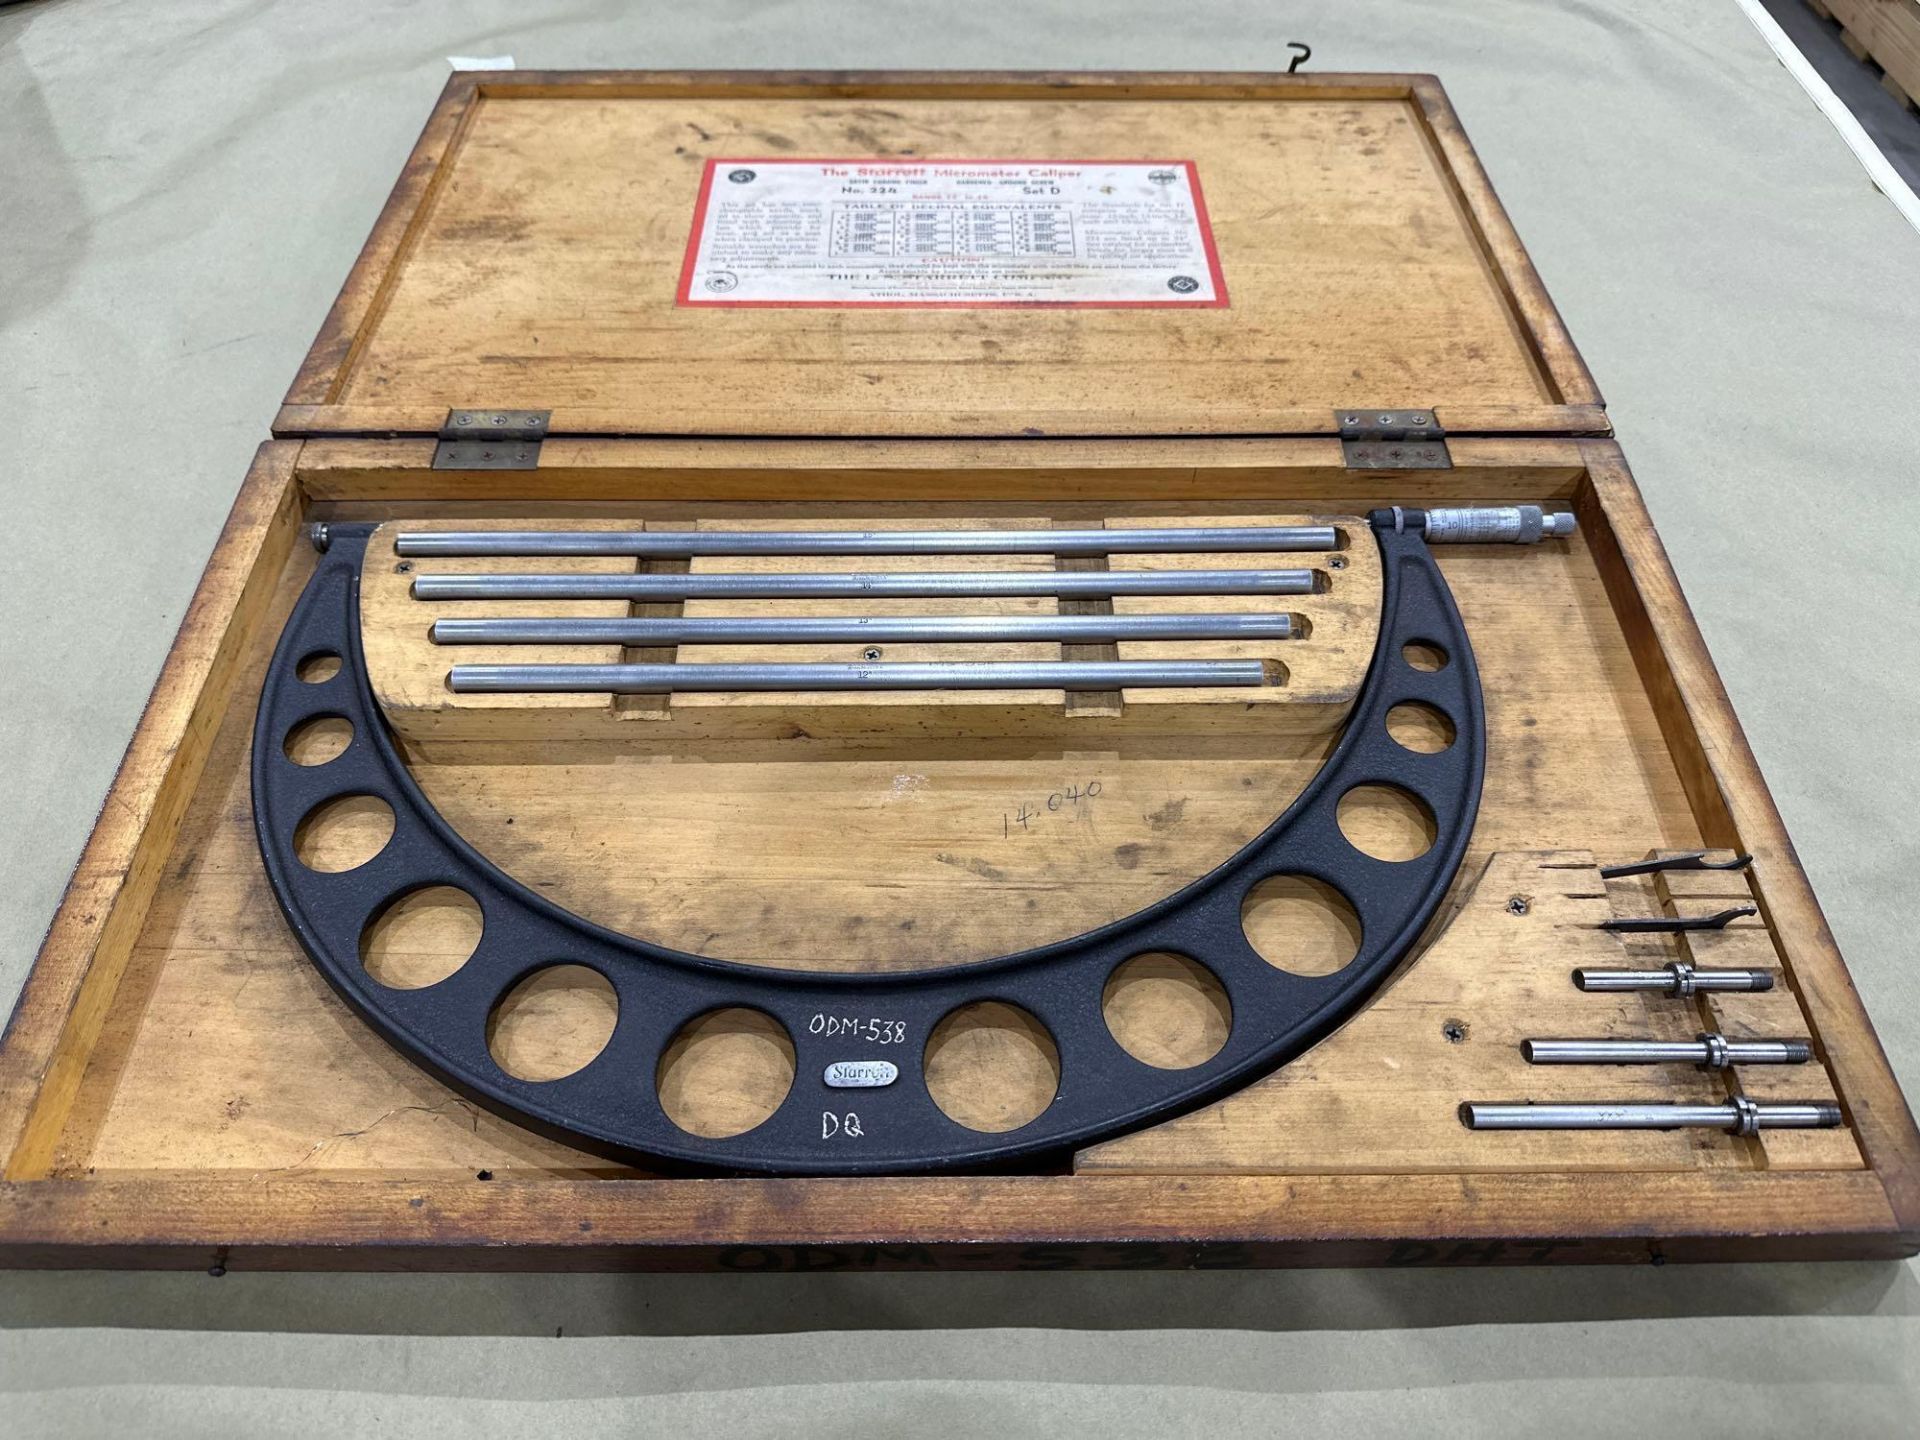 Starrett OD Micrometer Set No. 224,  12 to 16” range, with interchangeable anvils, in wood case - Image 8 of 8